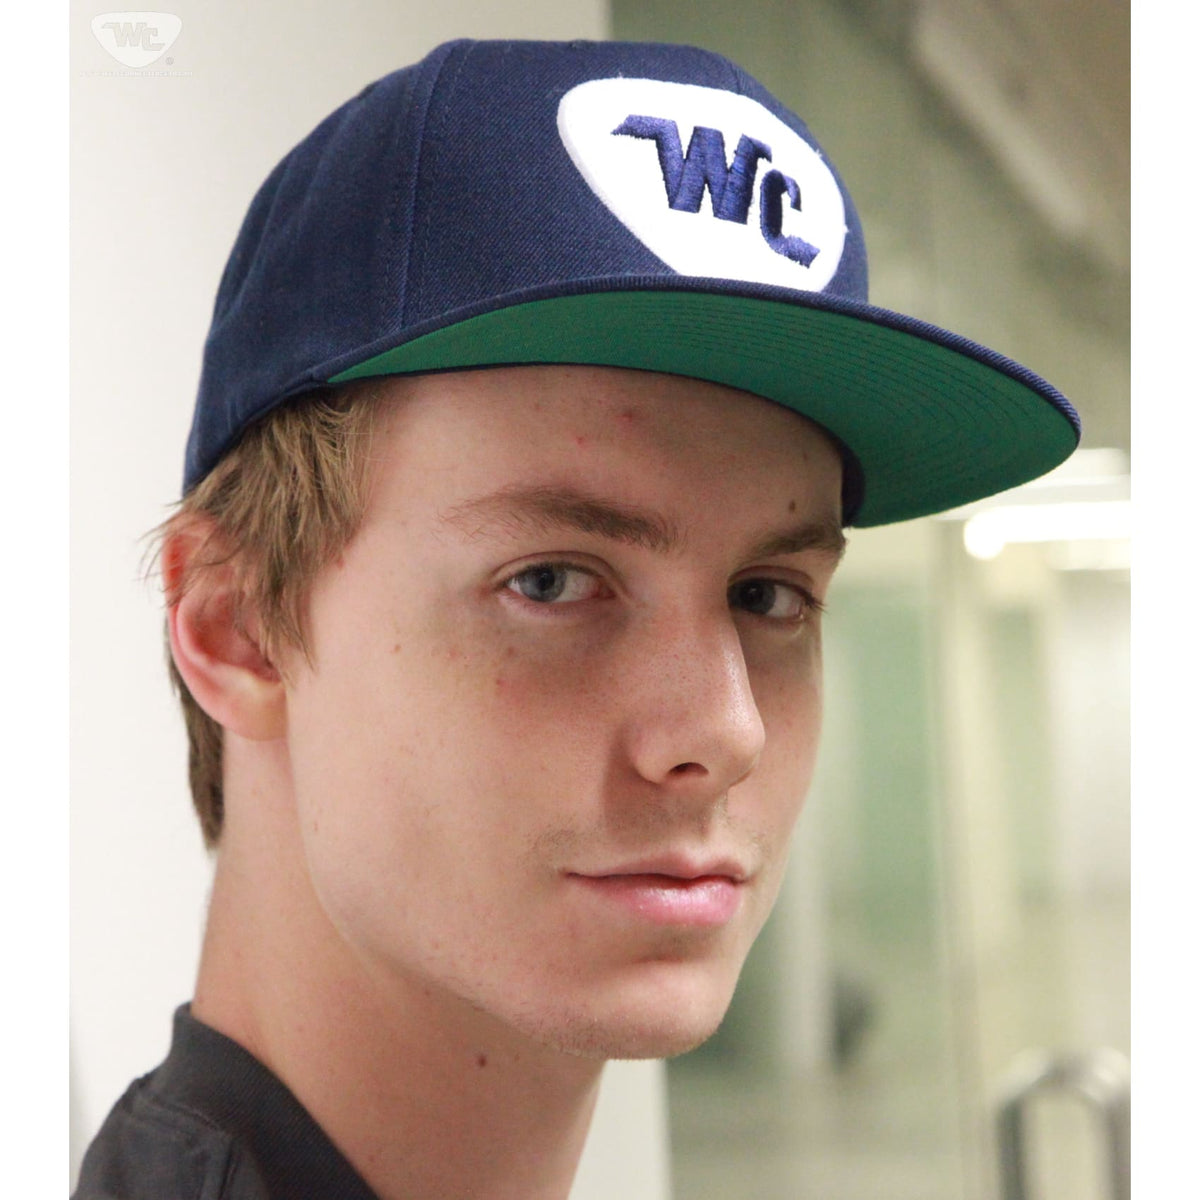 (Blue) Connected Snapback Well - Lifestyle Gear Cap